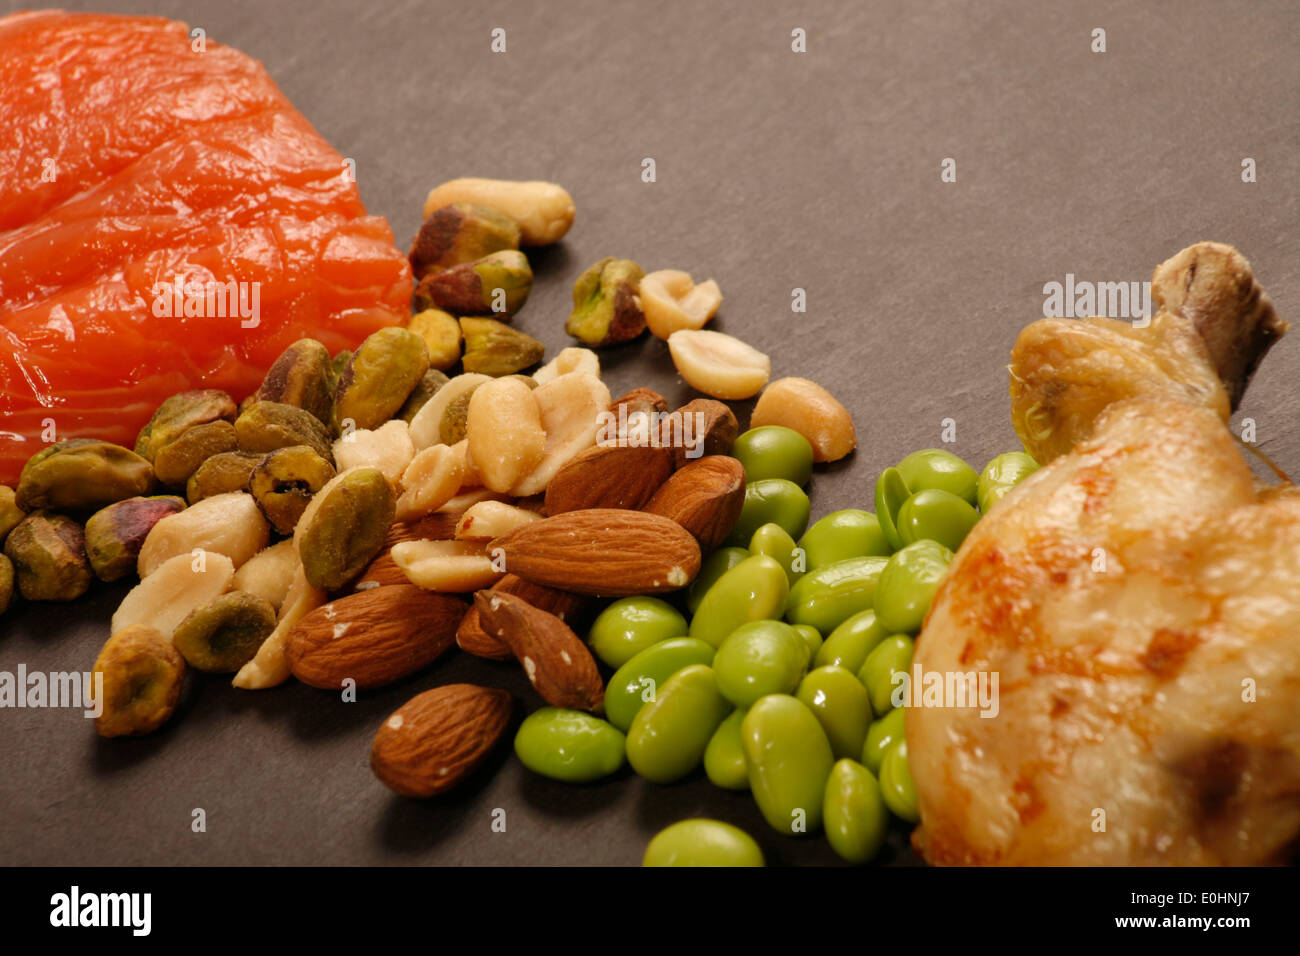 High Protein Foods Stock Photo